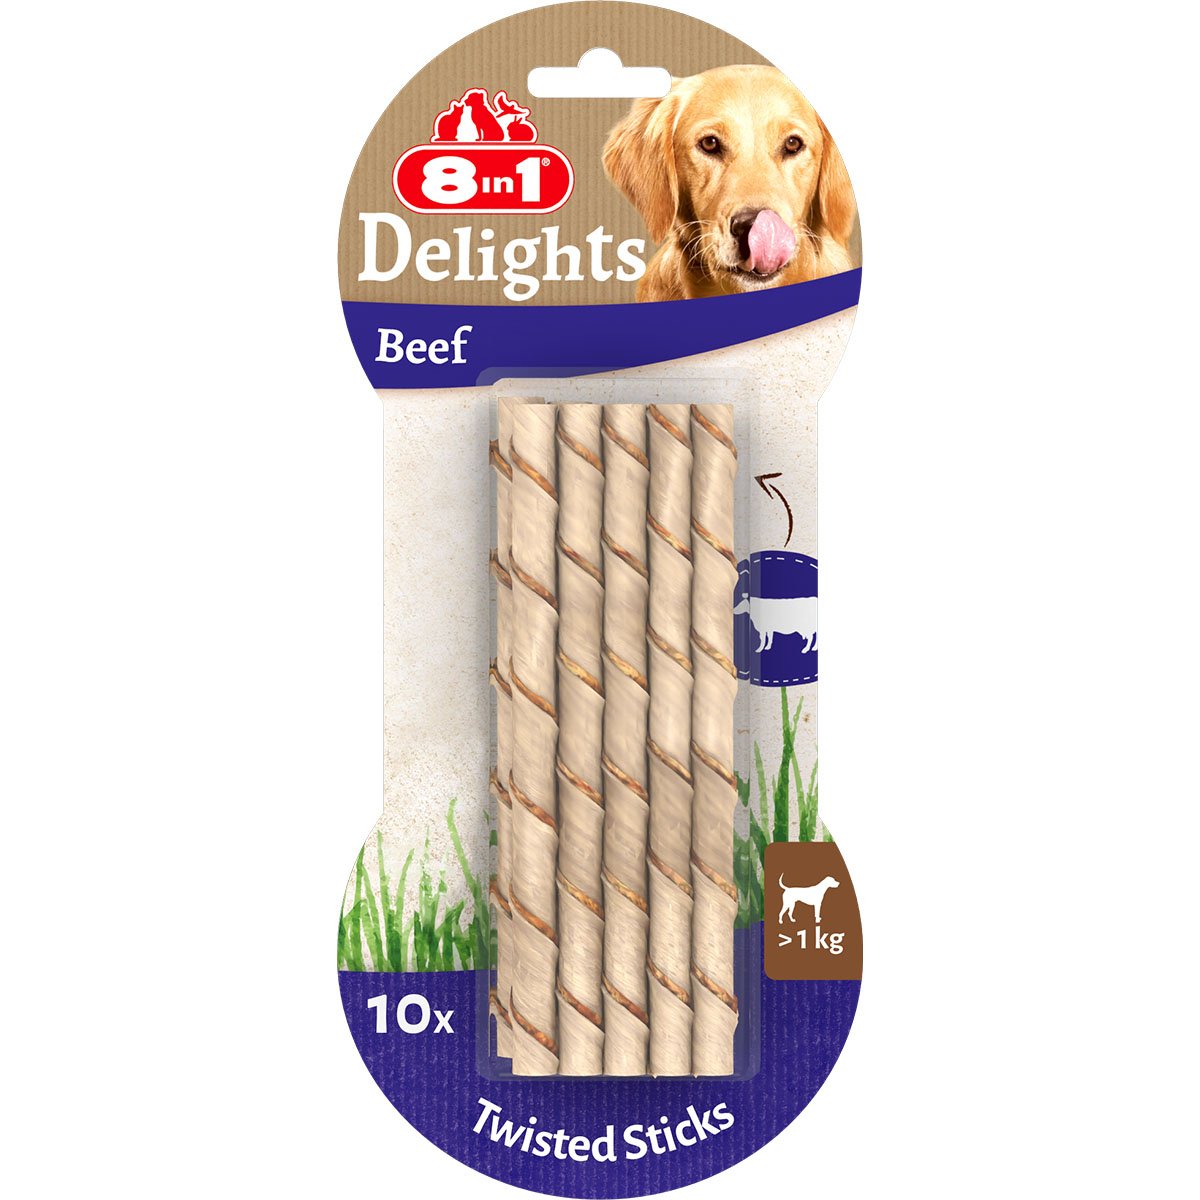 8in1 Delights Beef Twisted Sticks 10 kusů